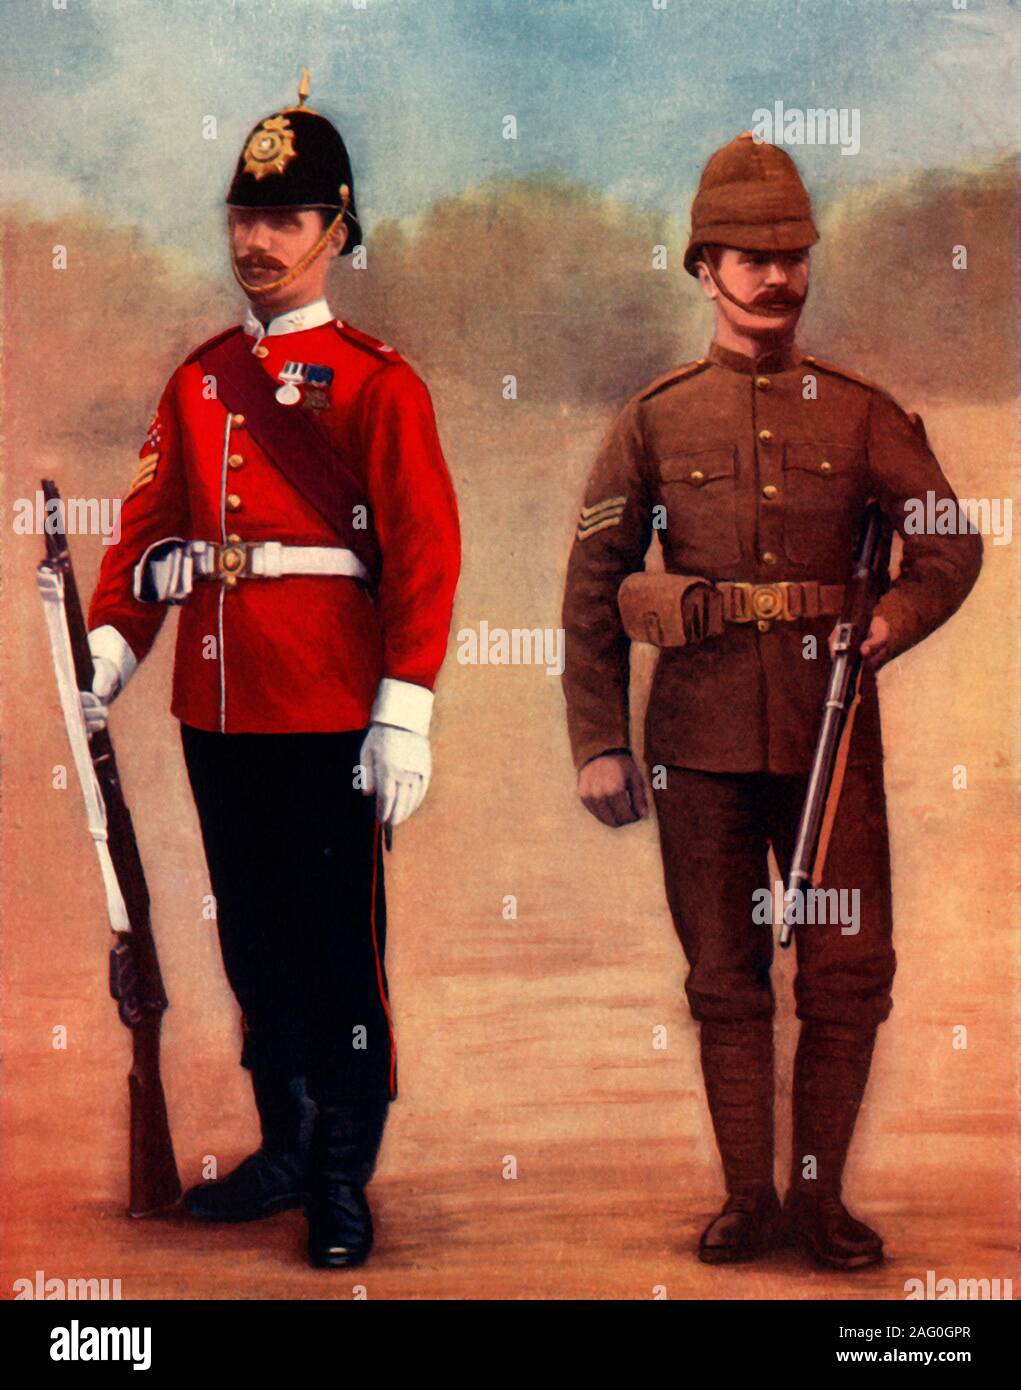 'West Yorkshire Regiment (Colour-Sergeant) and Yorkshire Regiment (Sergeant)', 1900. The 2nd battalion of the West Yorkshire Regiment or Prince of Wales's Own infantry and Yorkshire Regiments during the Second Boer War 1899-1902. From &quot;South Africa and the Transvaal War, Vol. IV&quot;, by Louis Creswicke. [T. C. &amp; E. C. Jack, Edinburgh, 1900] Stock Photo